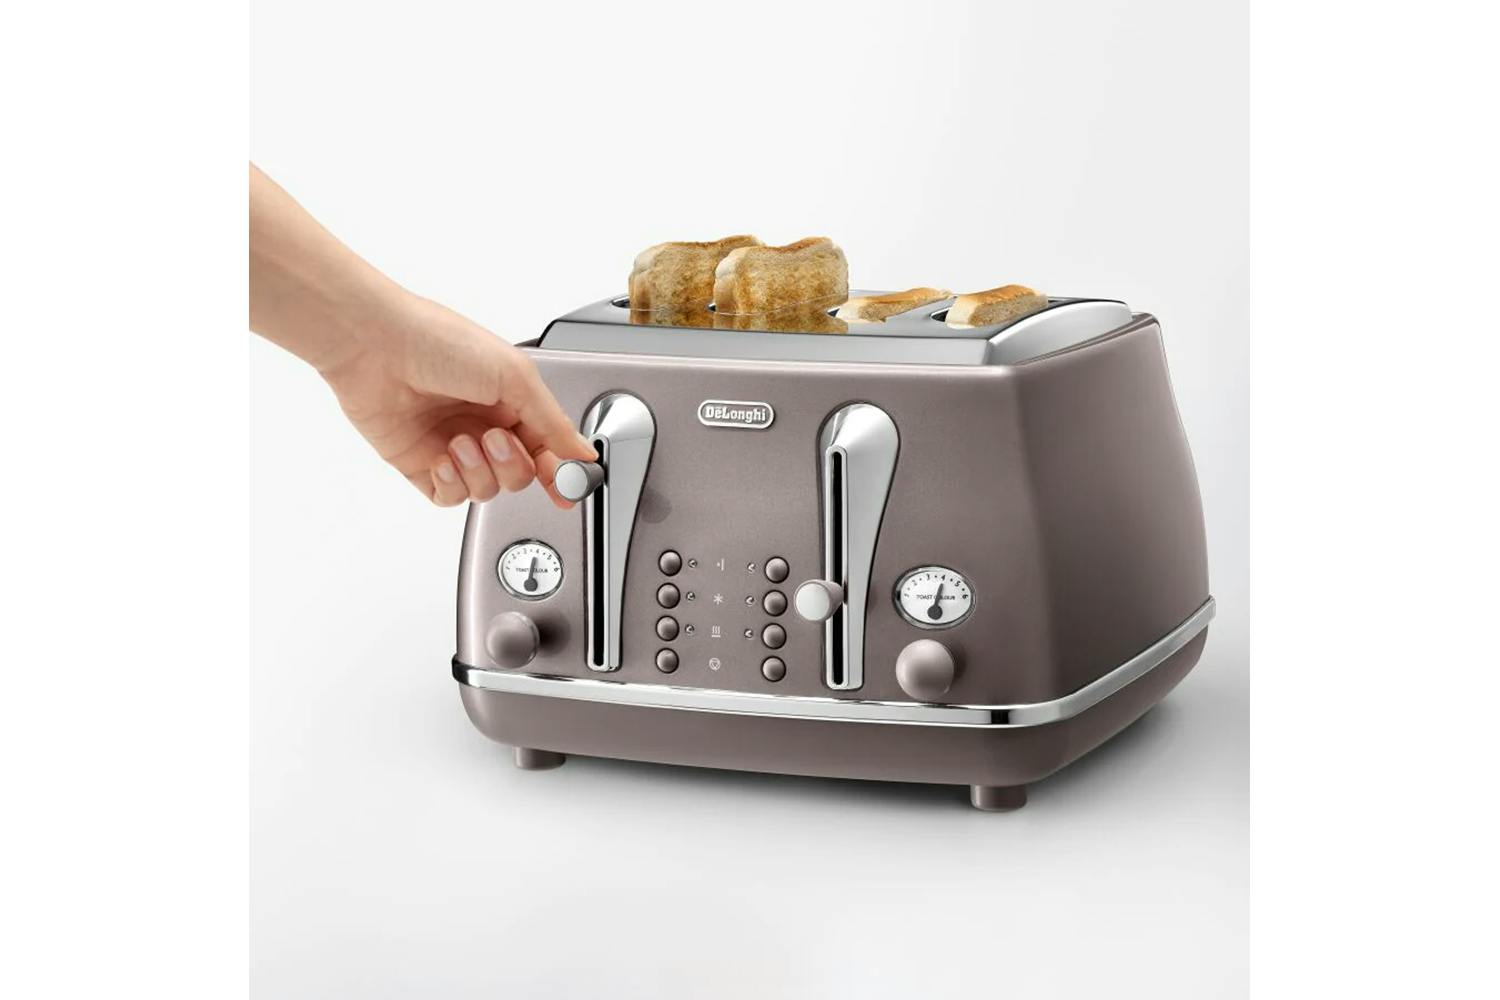 DELONGHI Icona Vintage toaster grille-pain 2 tranches 4 fonctions 900w  beige/inox